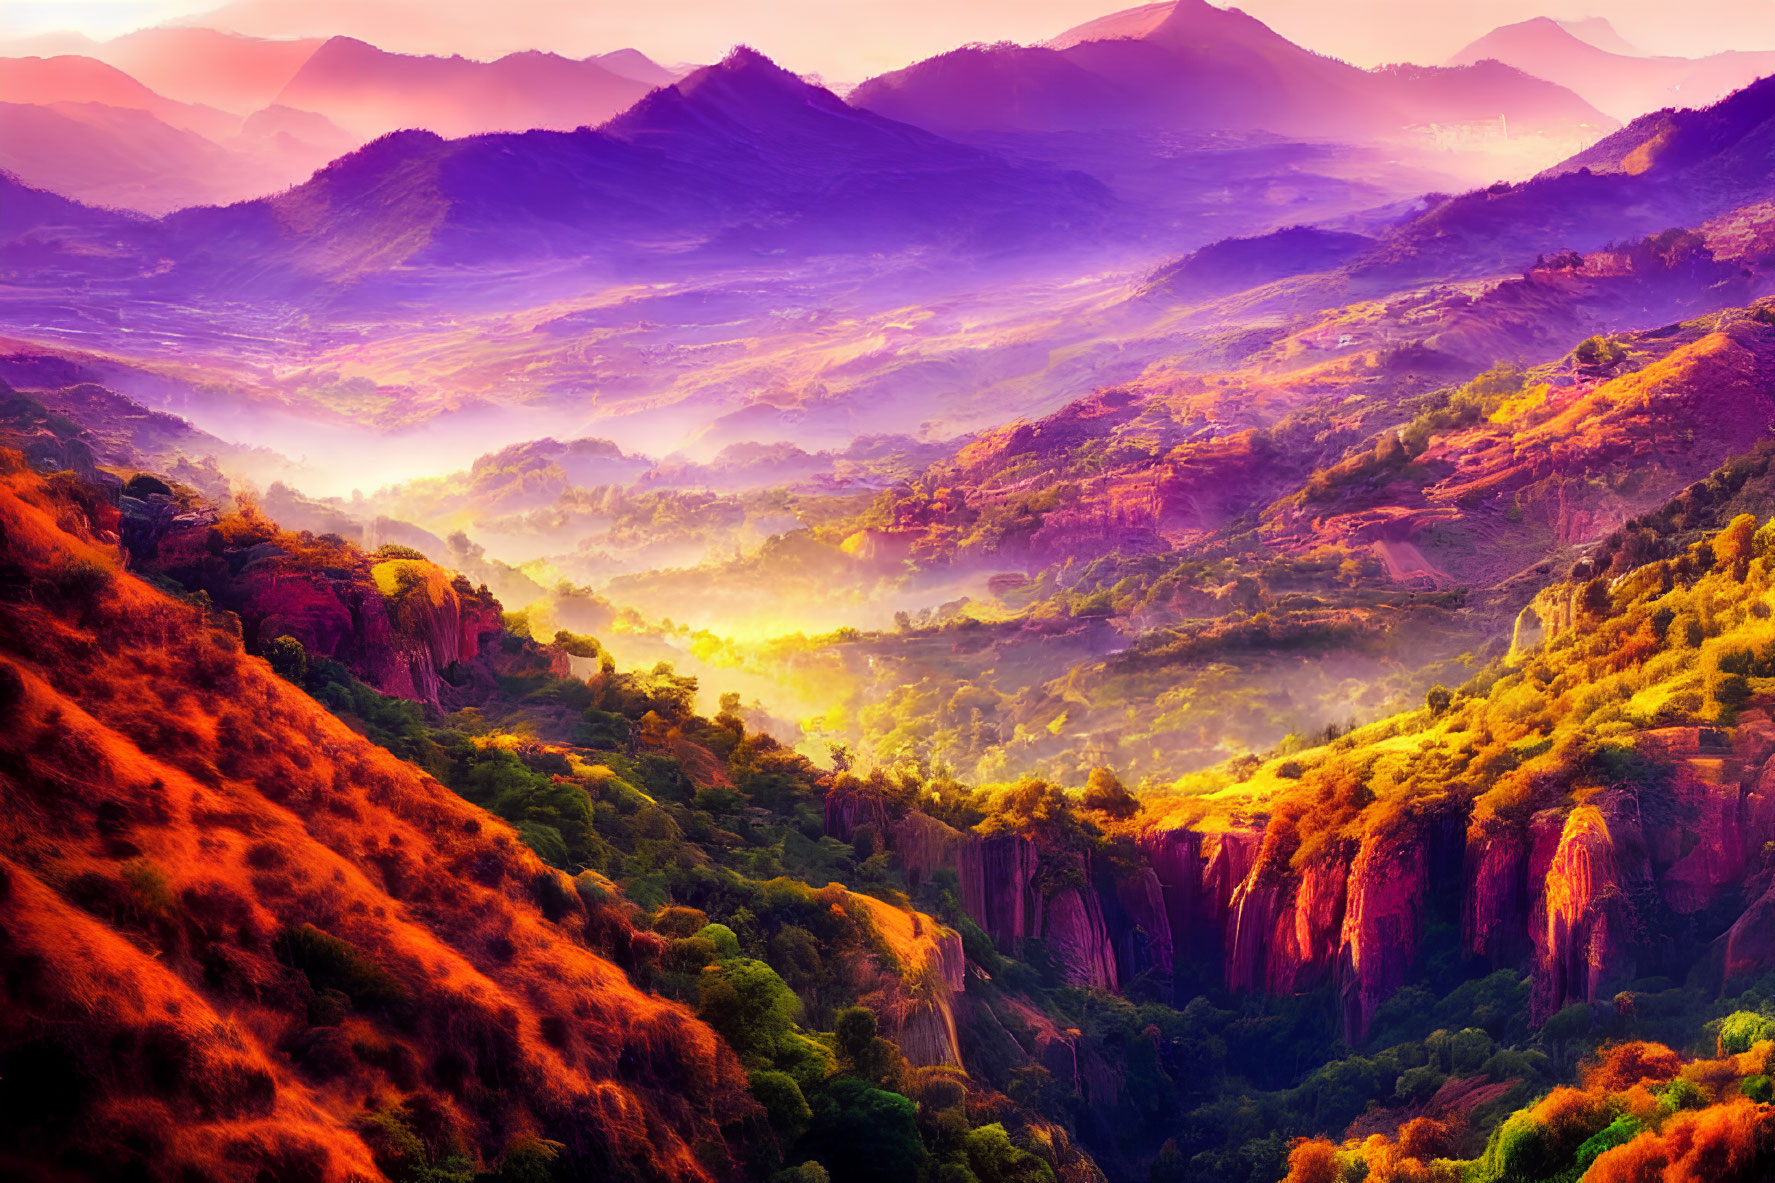 Scenic landscape with rolling hills and mist-filled valleys in warm purple and orange light